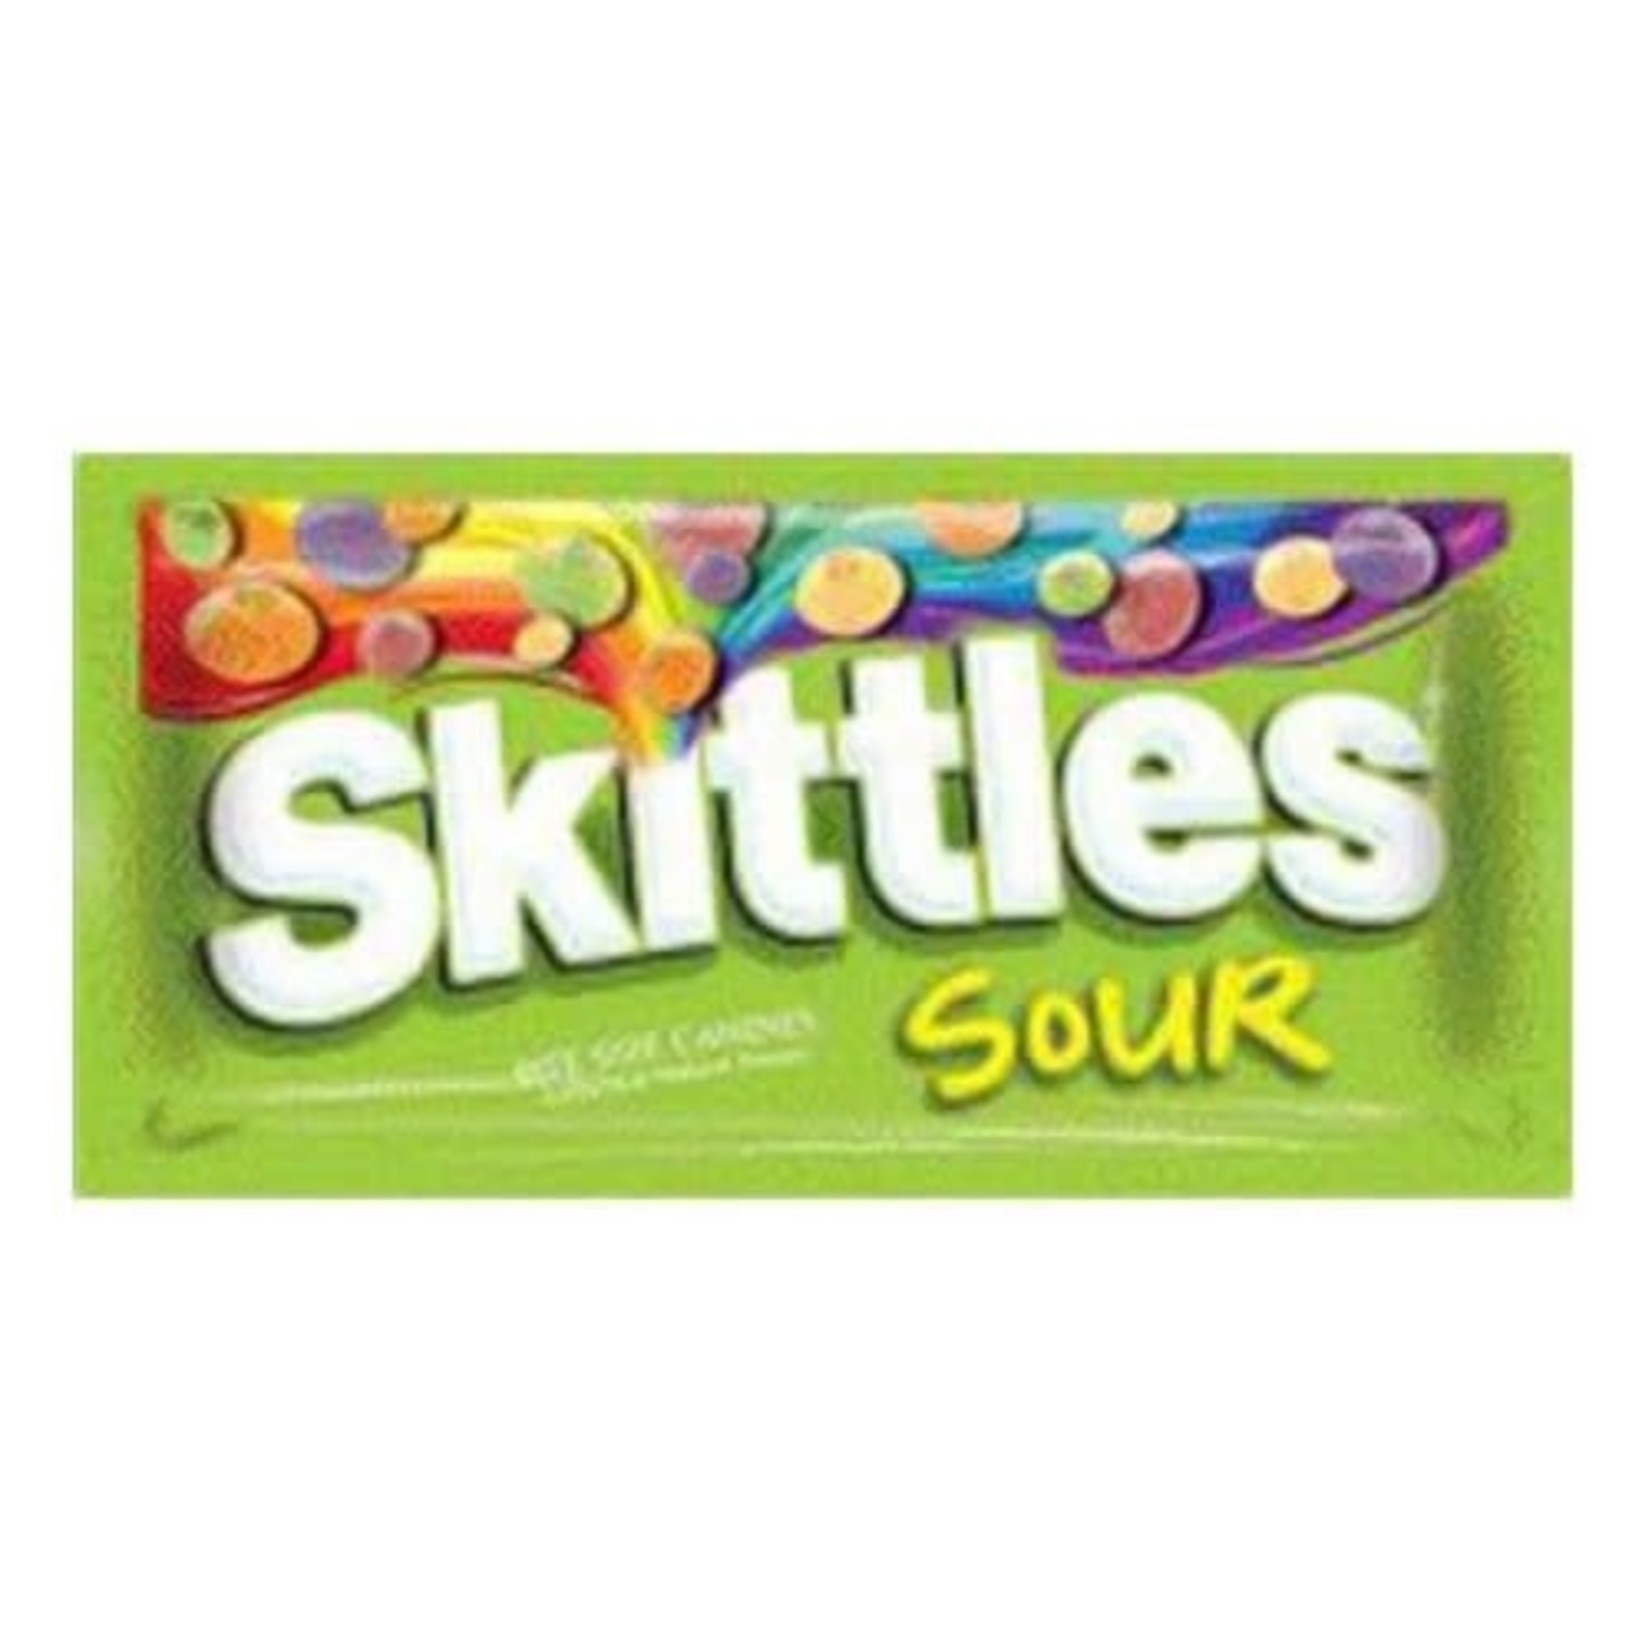 Skittles Single Smoothing Candy Case | FoodServiceDirect